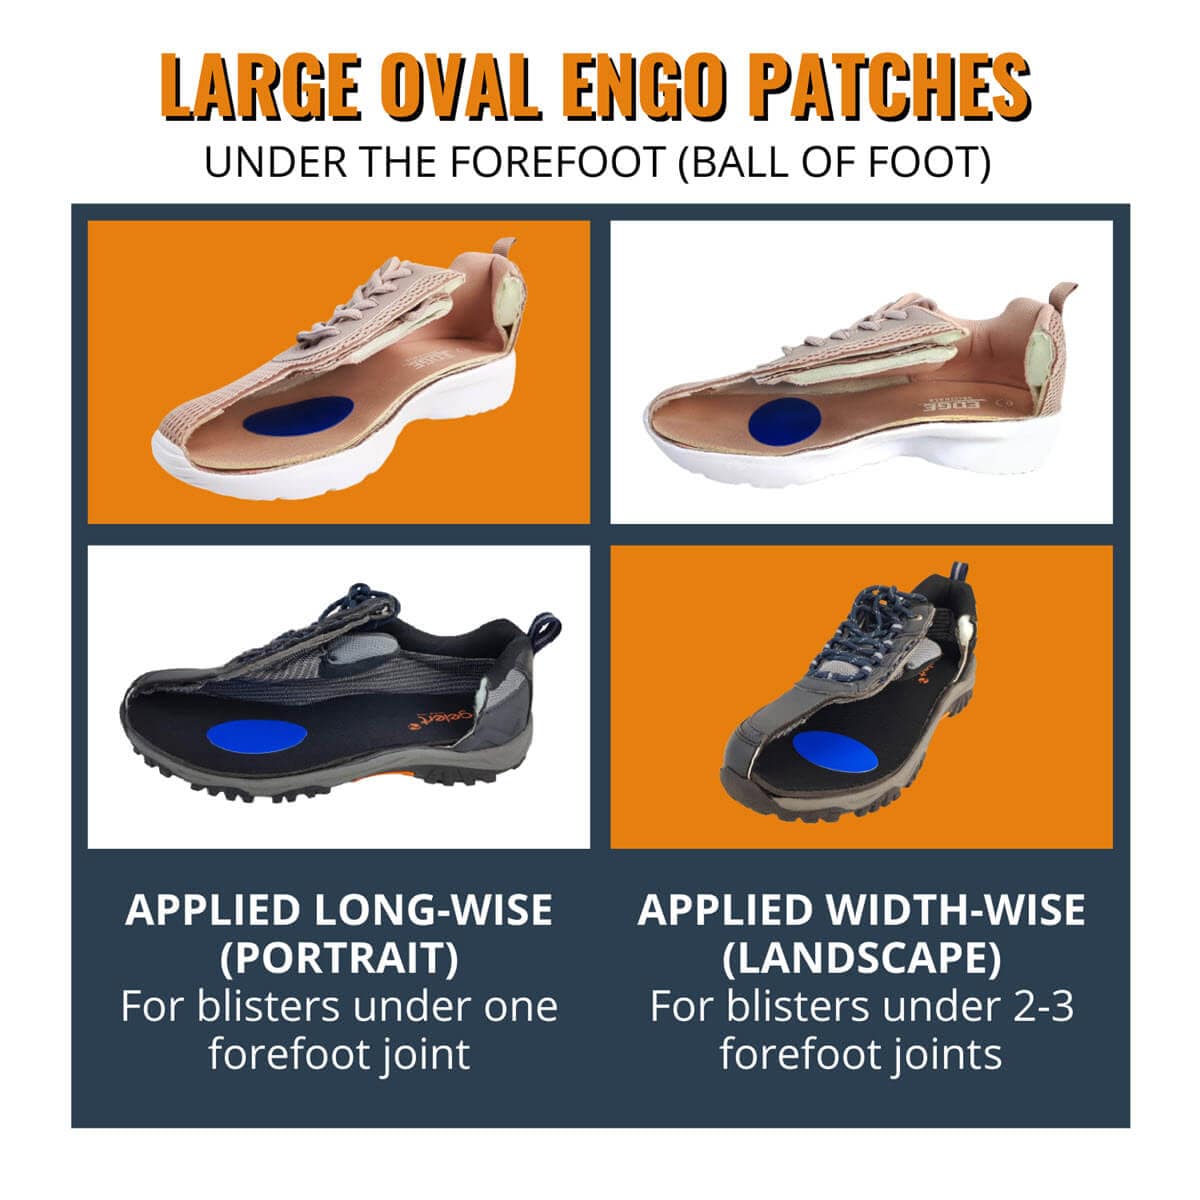 ENGO Blister Patches 4-Pack 6-Pack 30-Pack large oval patches applied to the insole for forefoot blisters